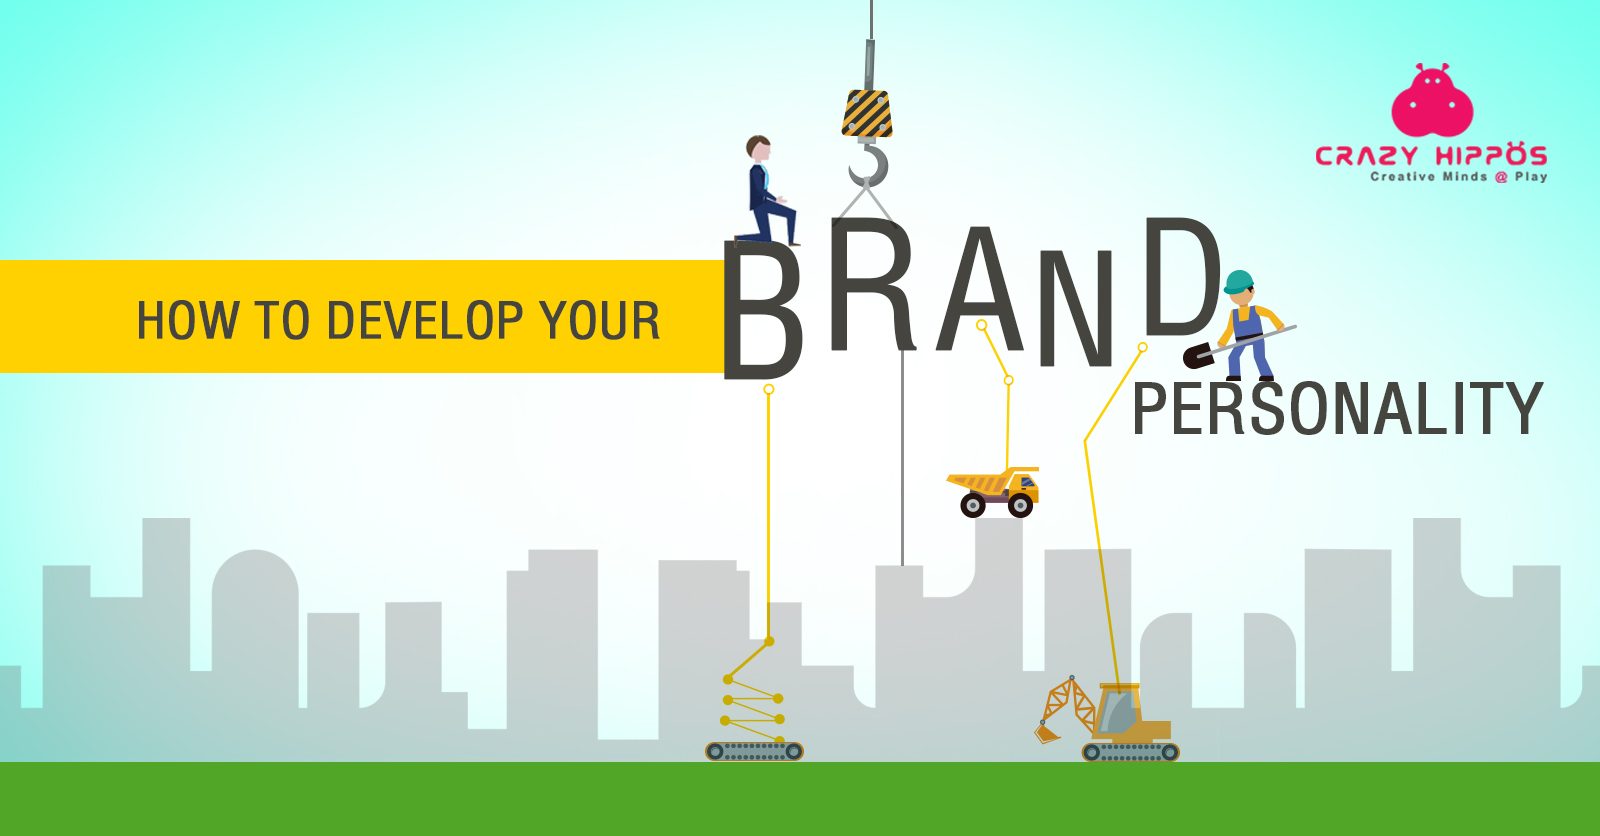 HOW TO DEVELOP YOUR BRAND’S PERSONALITY